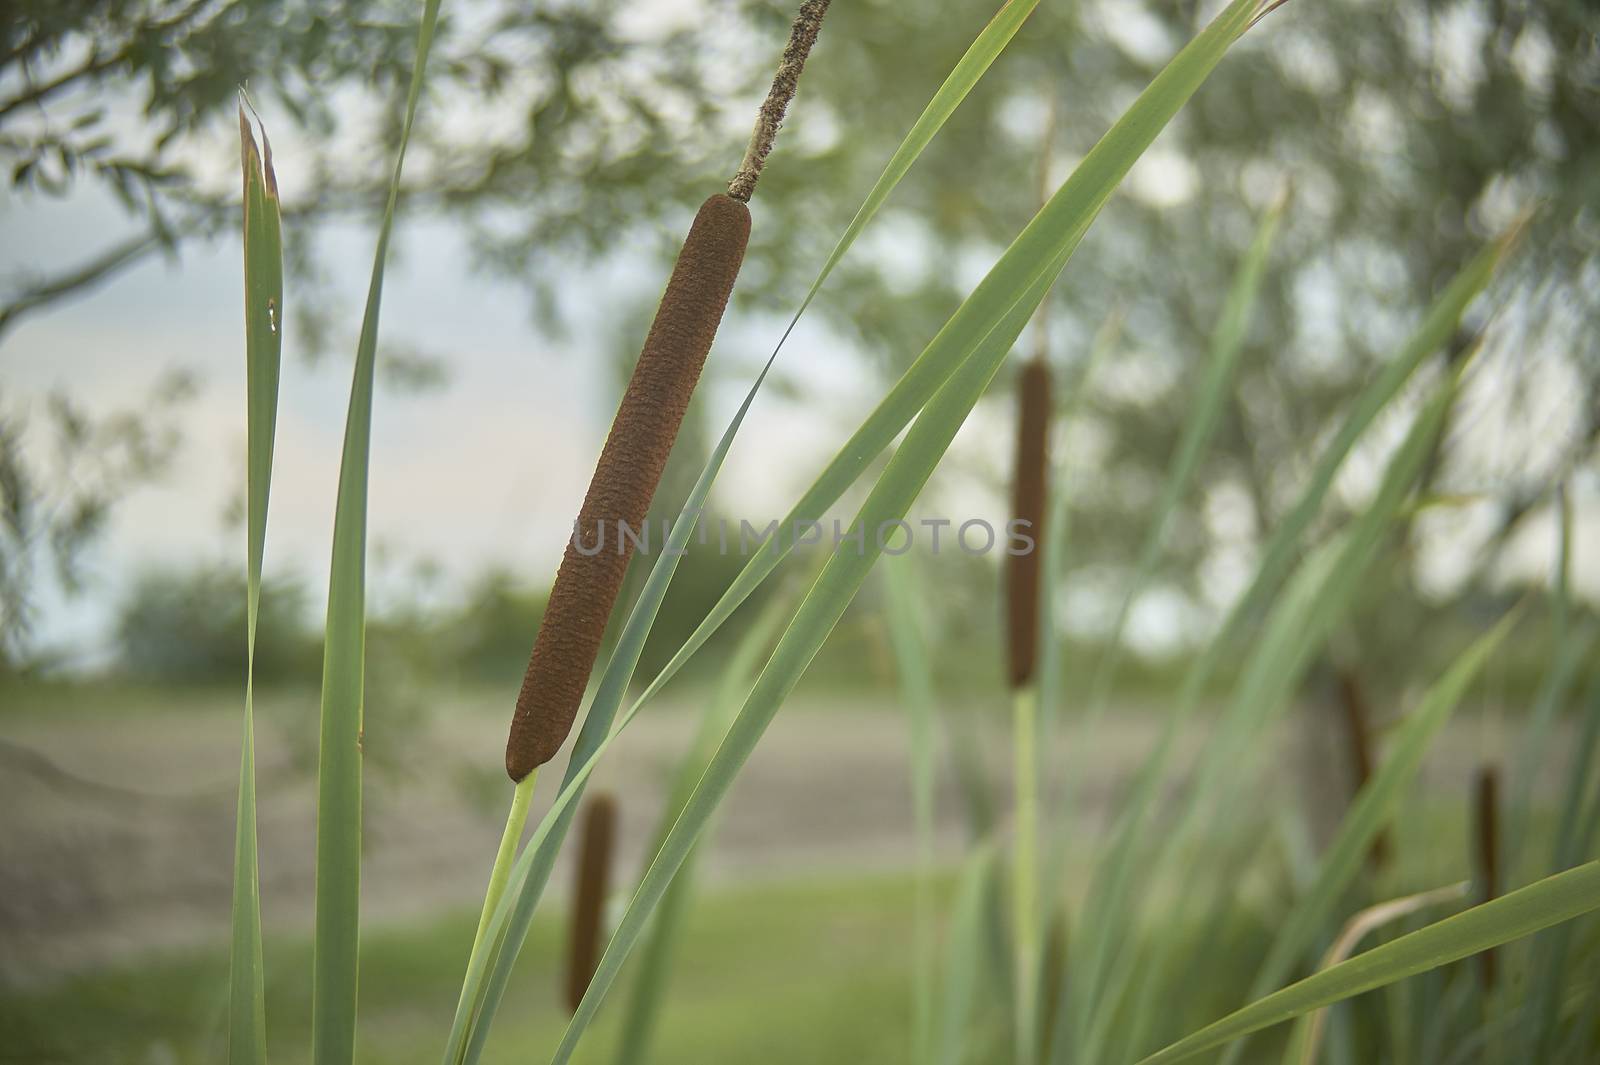 Detail of tifa plant, Typha latifolia, photographed in a pond, in northern italy, a typical plant of wet and stagnant areas.